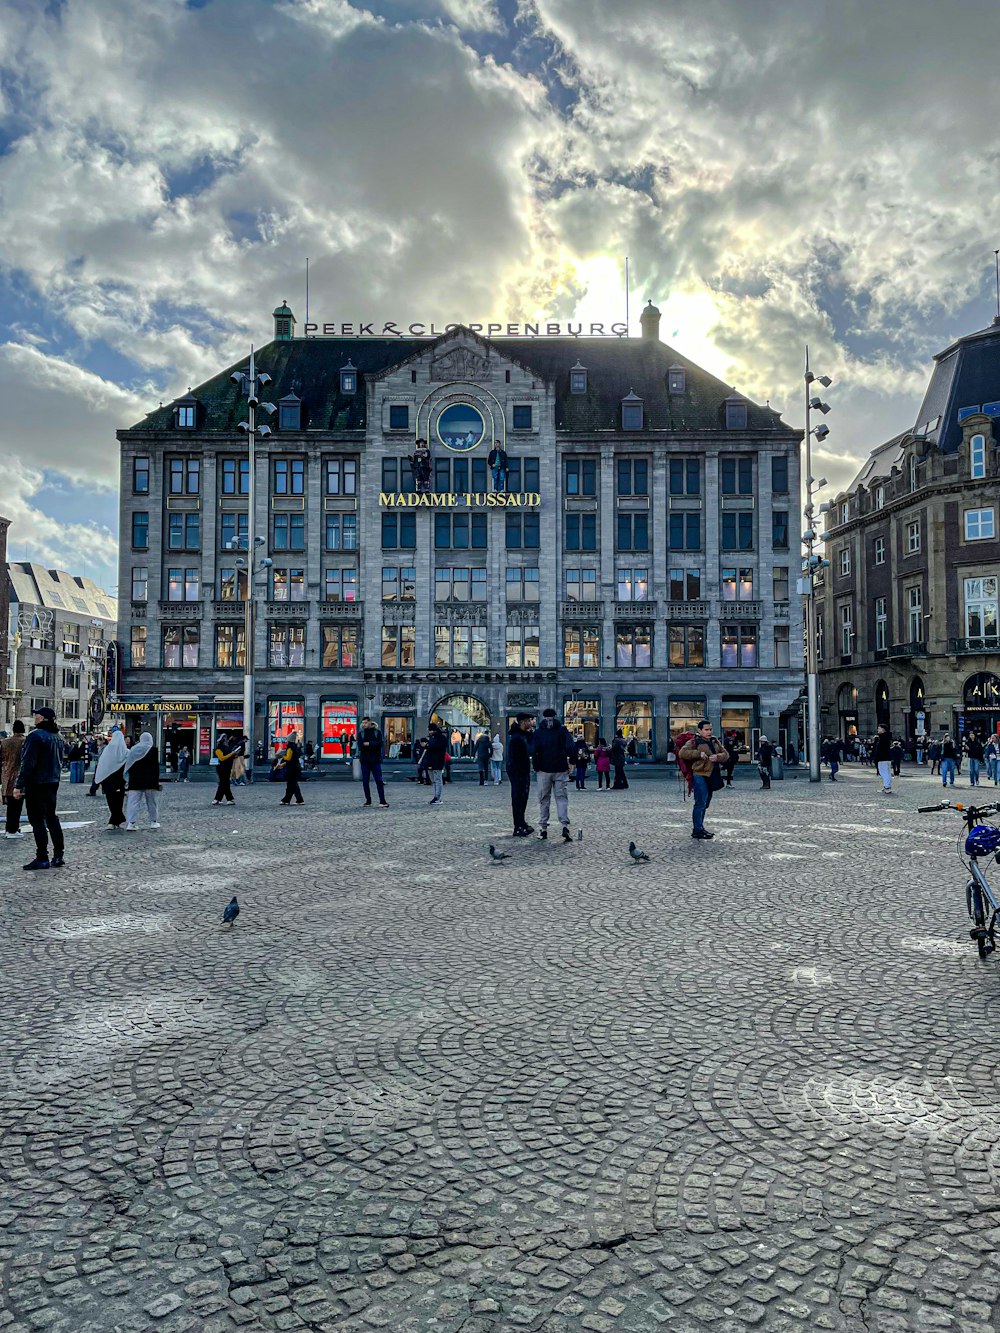 a group of people walking around a city square